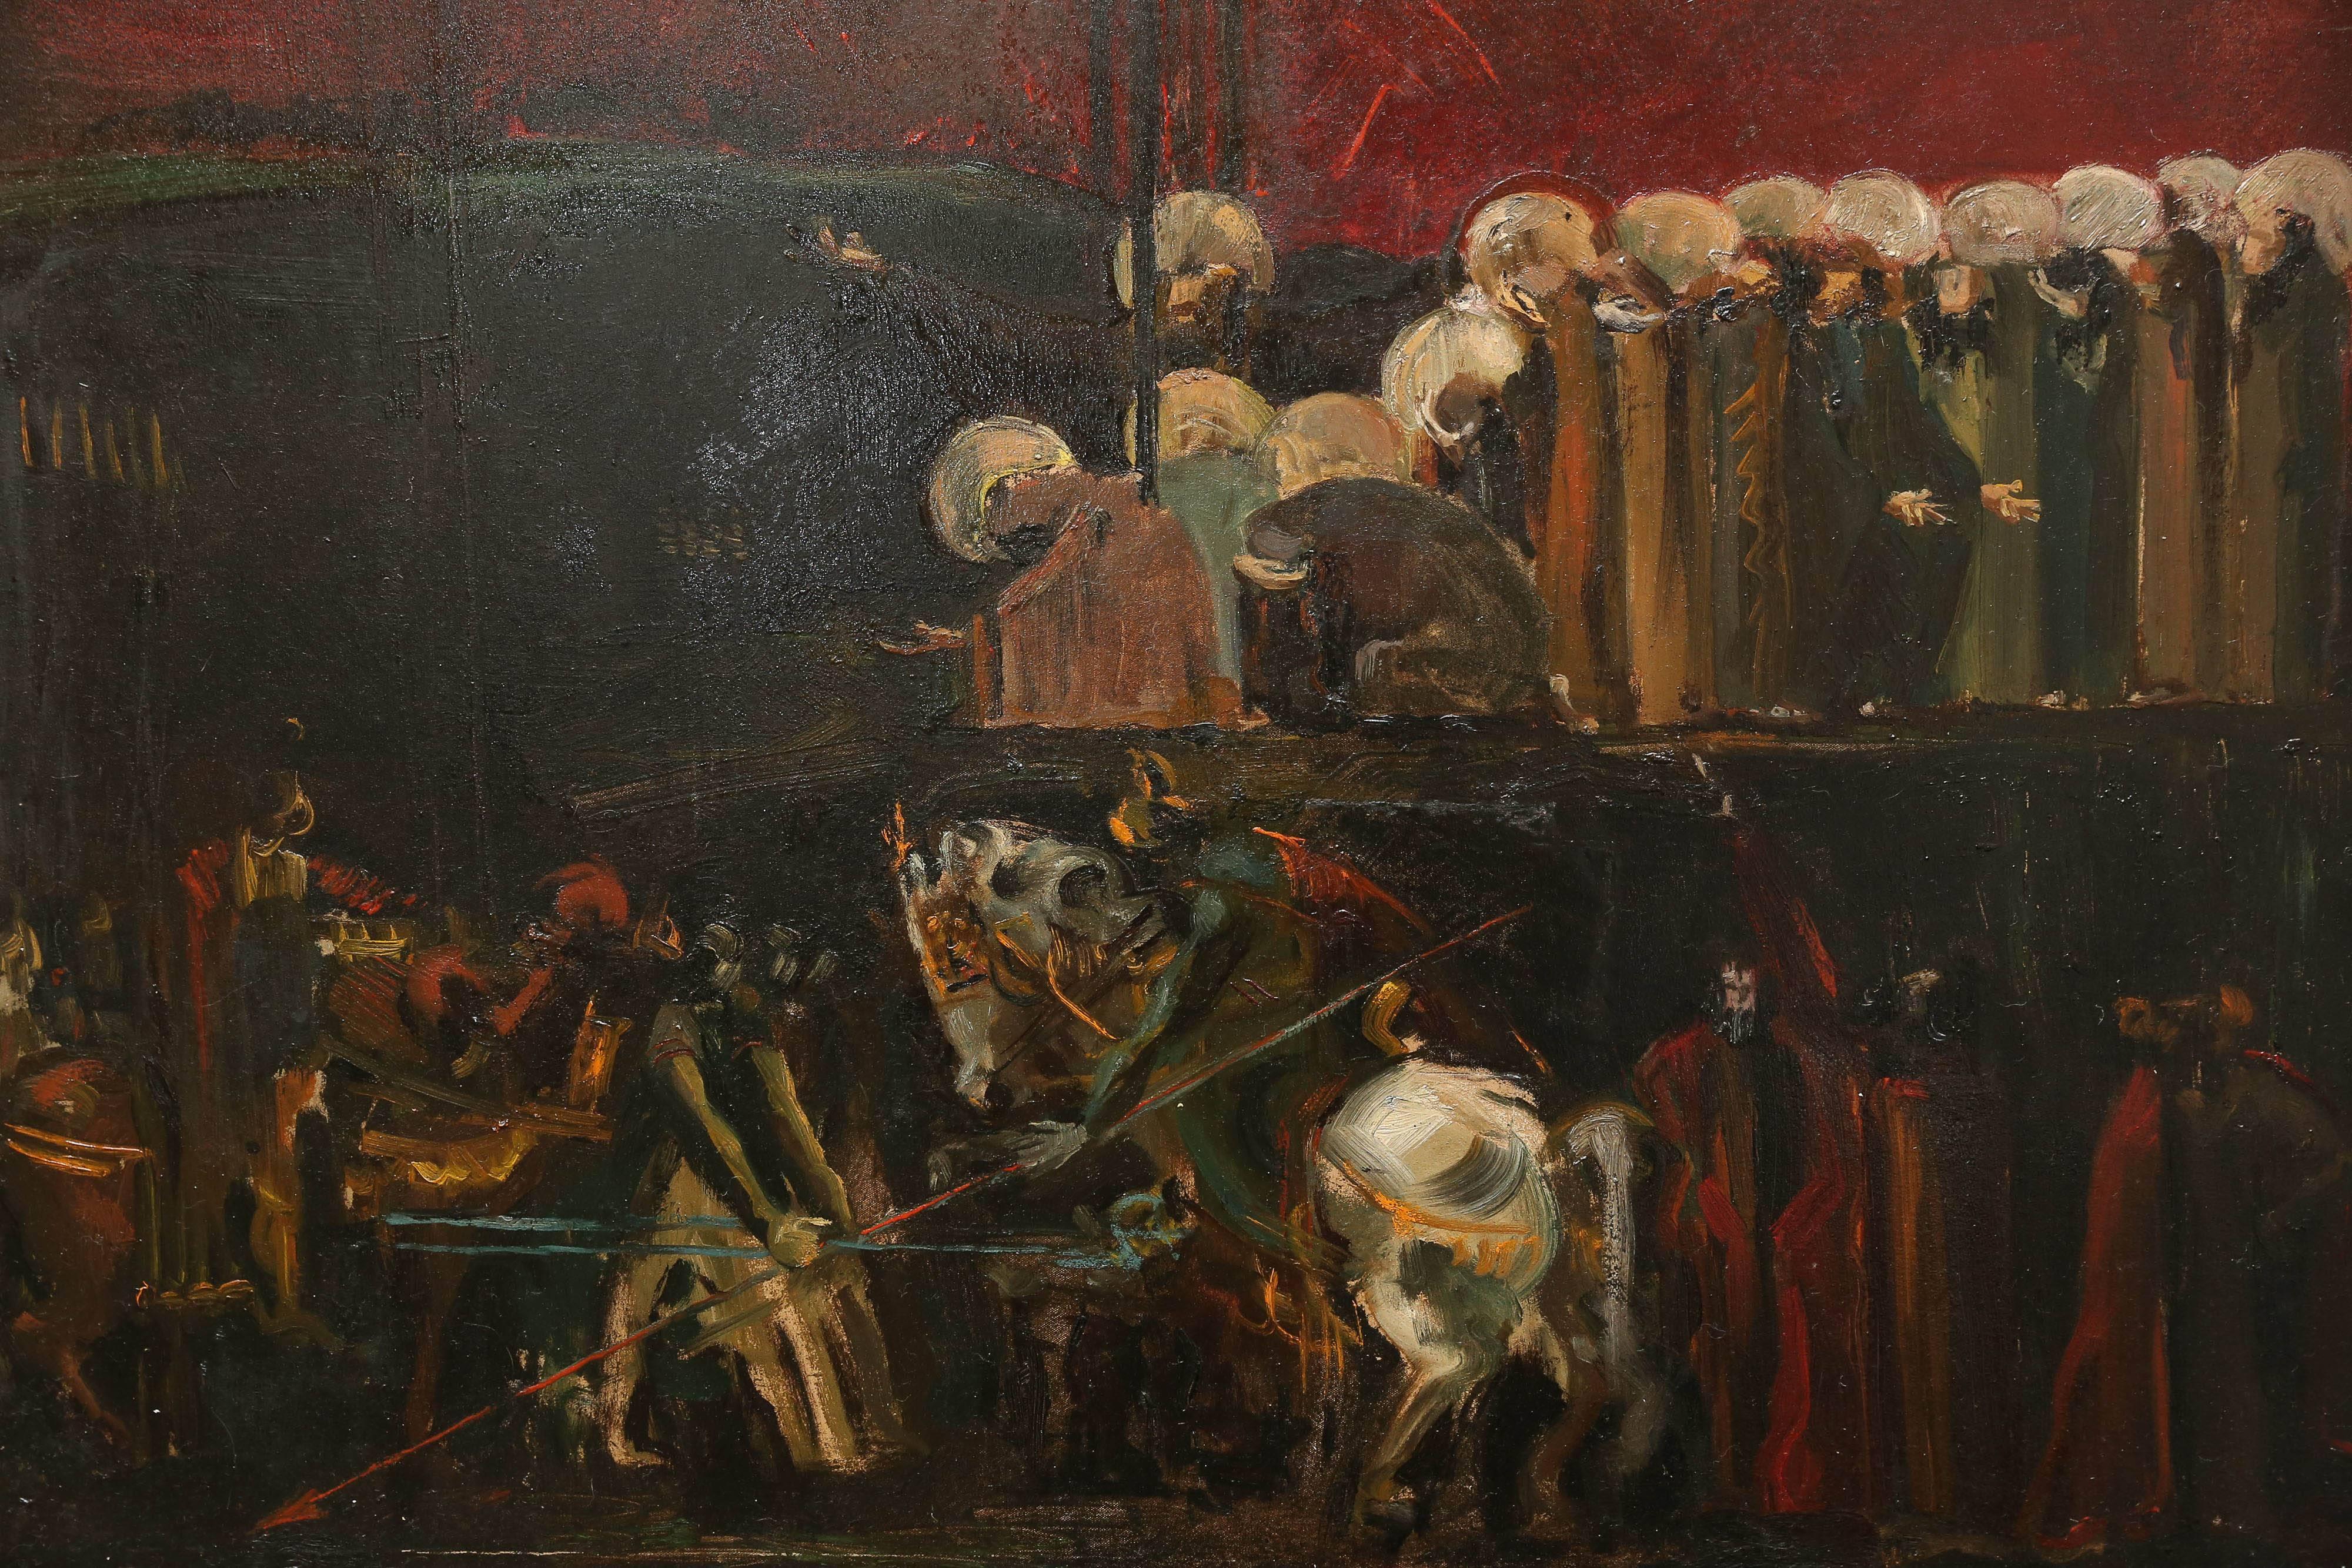 Luis Szepesi, signature lower left. Dimensions: 32 x 38 inches oil on fabric. Executed in an expressionistic style, depicting Life cycle of Christ. The unusual composition of the subject matter makes this art work exceptionally unique. Overall size